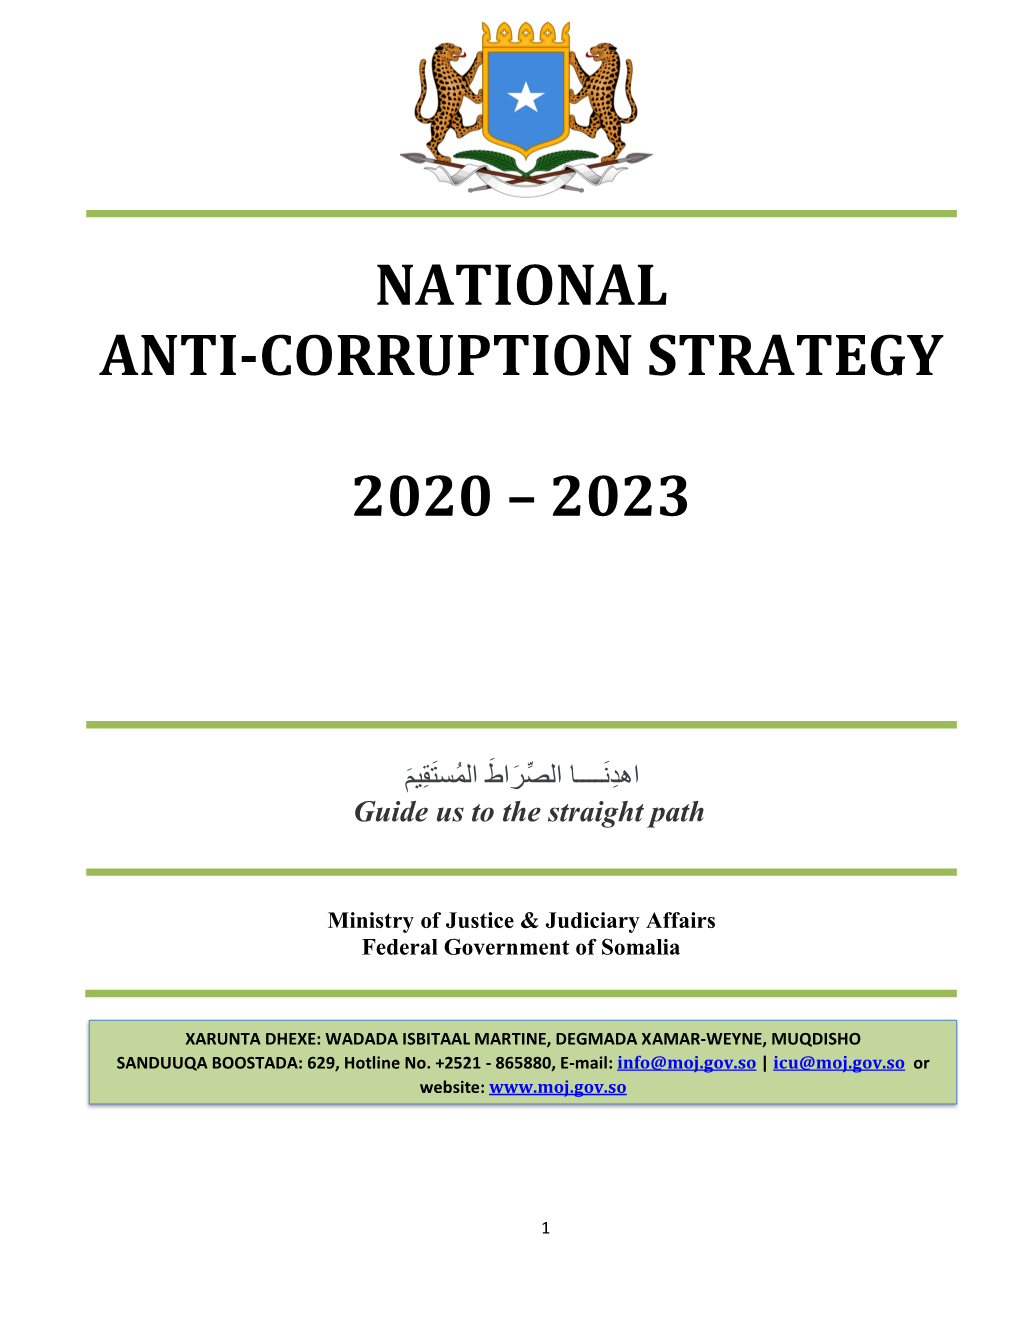 Approved National Anti-Corruption Strategy 2020-2023